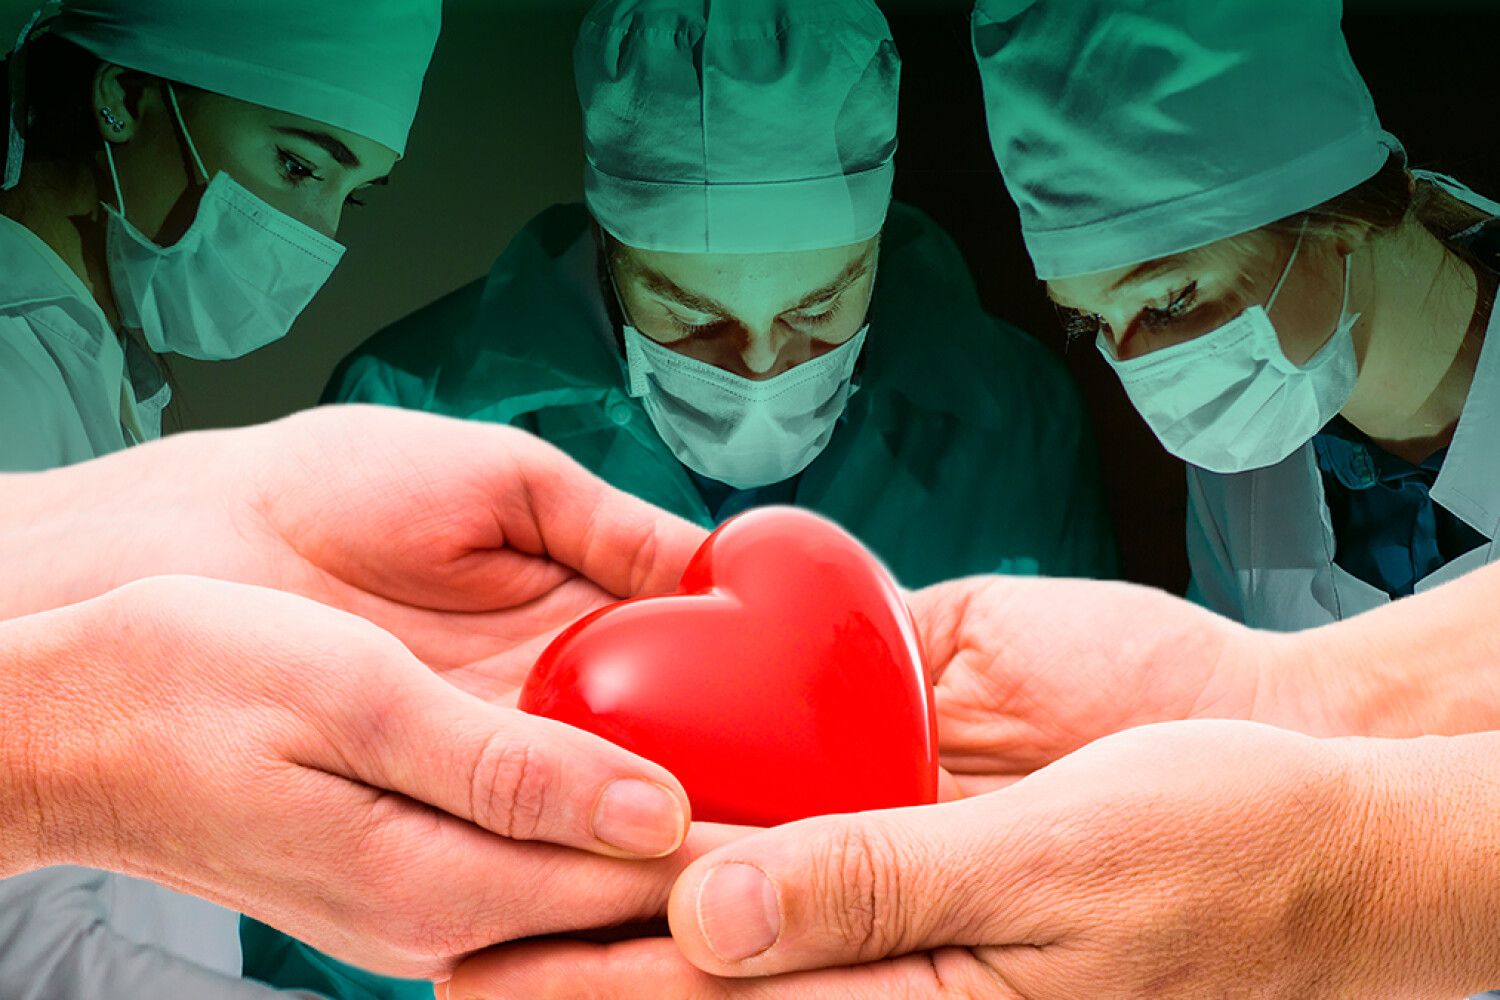 The World’s First Successful Human Heart Transplant Was a Worldwide Sensation